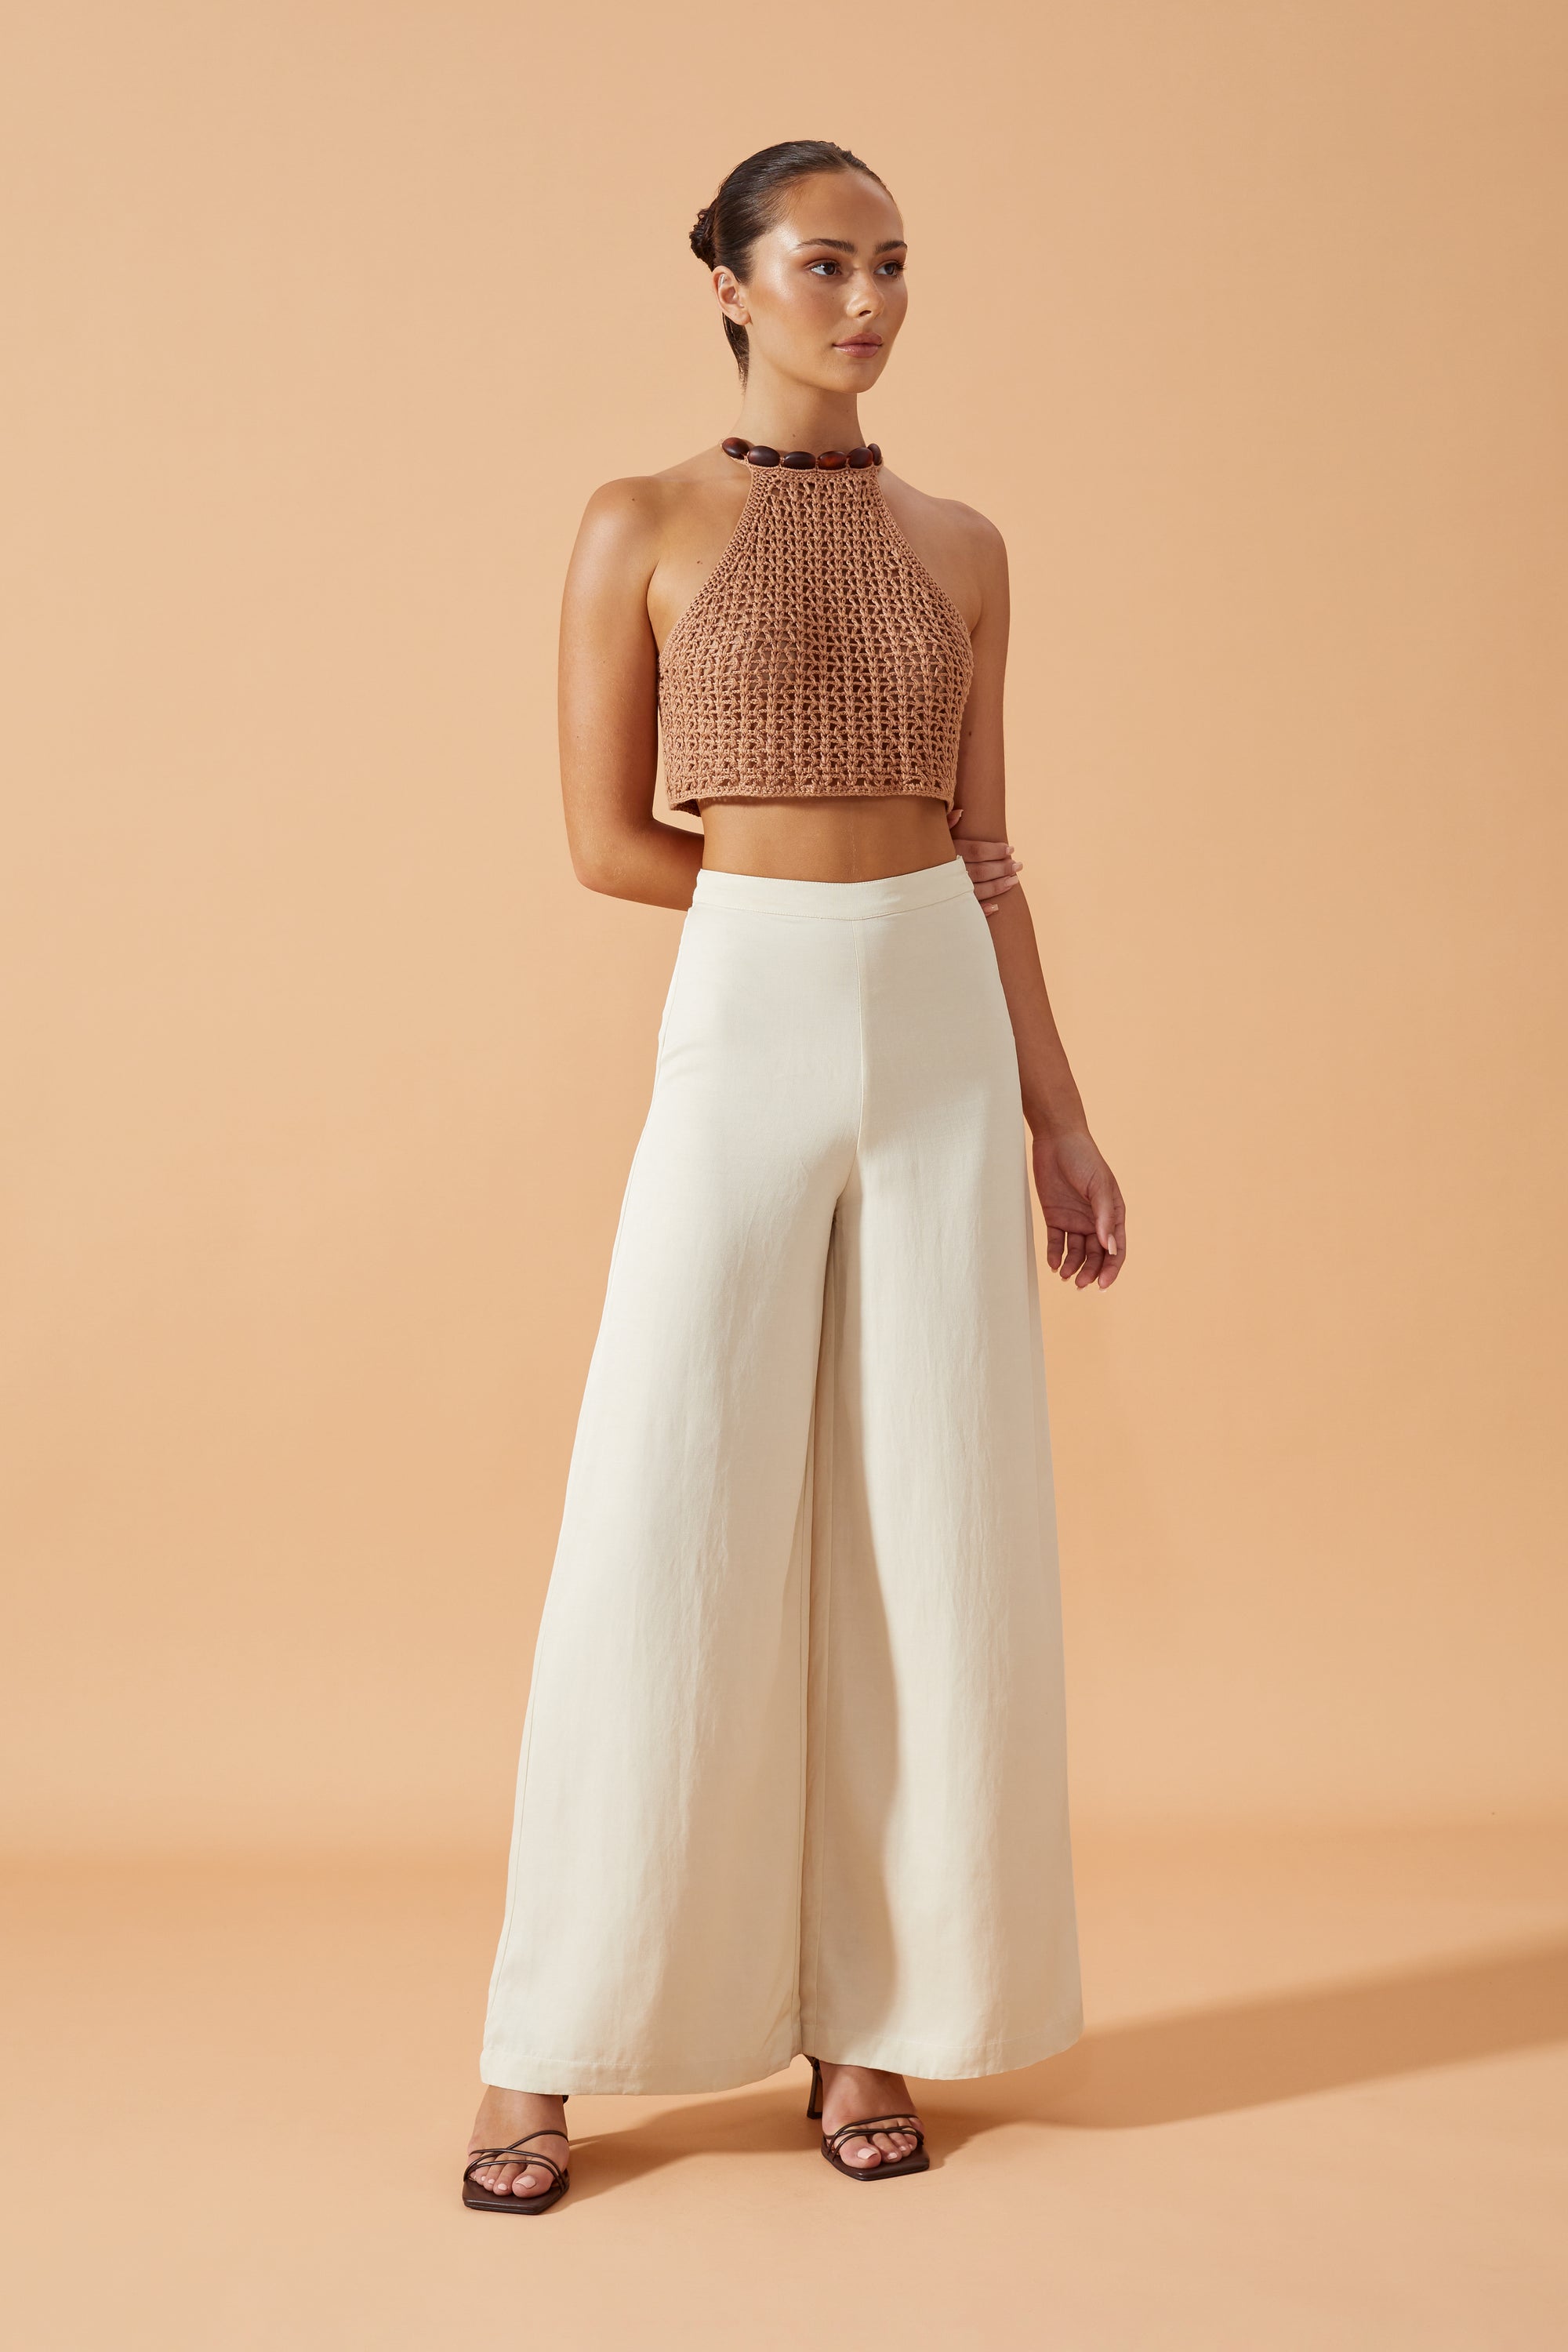 Flook The Label Sonali Crochet Crop Top.  Halter neck embellished by Resin beads. Matched with Zarela Pants in WhiteFront View. 